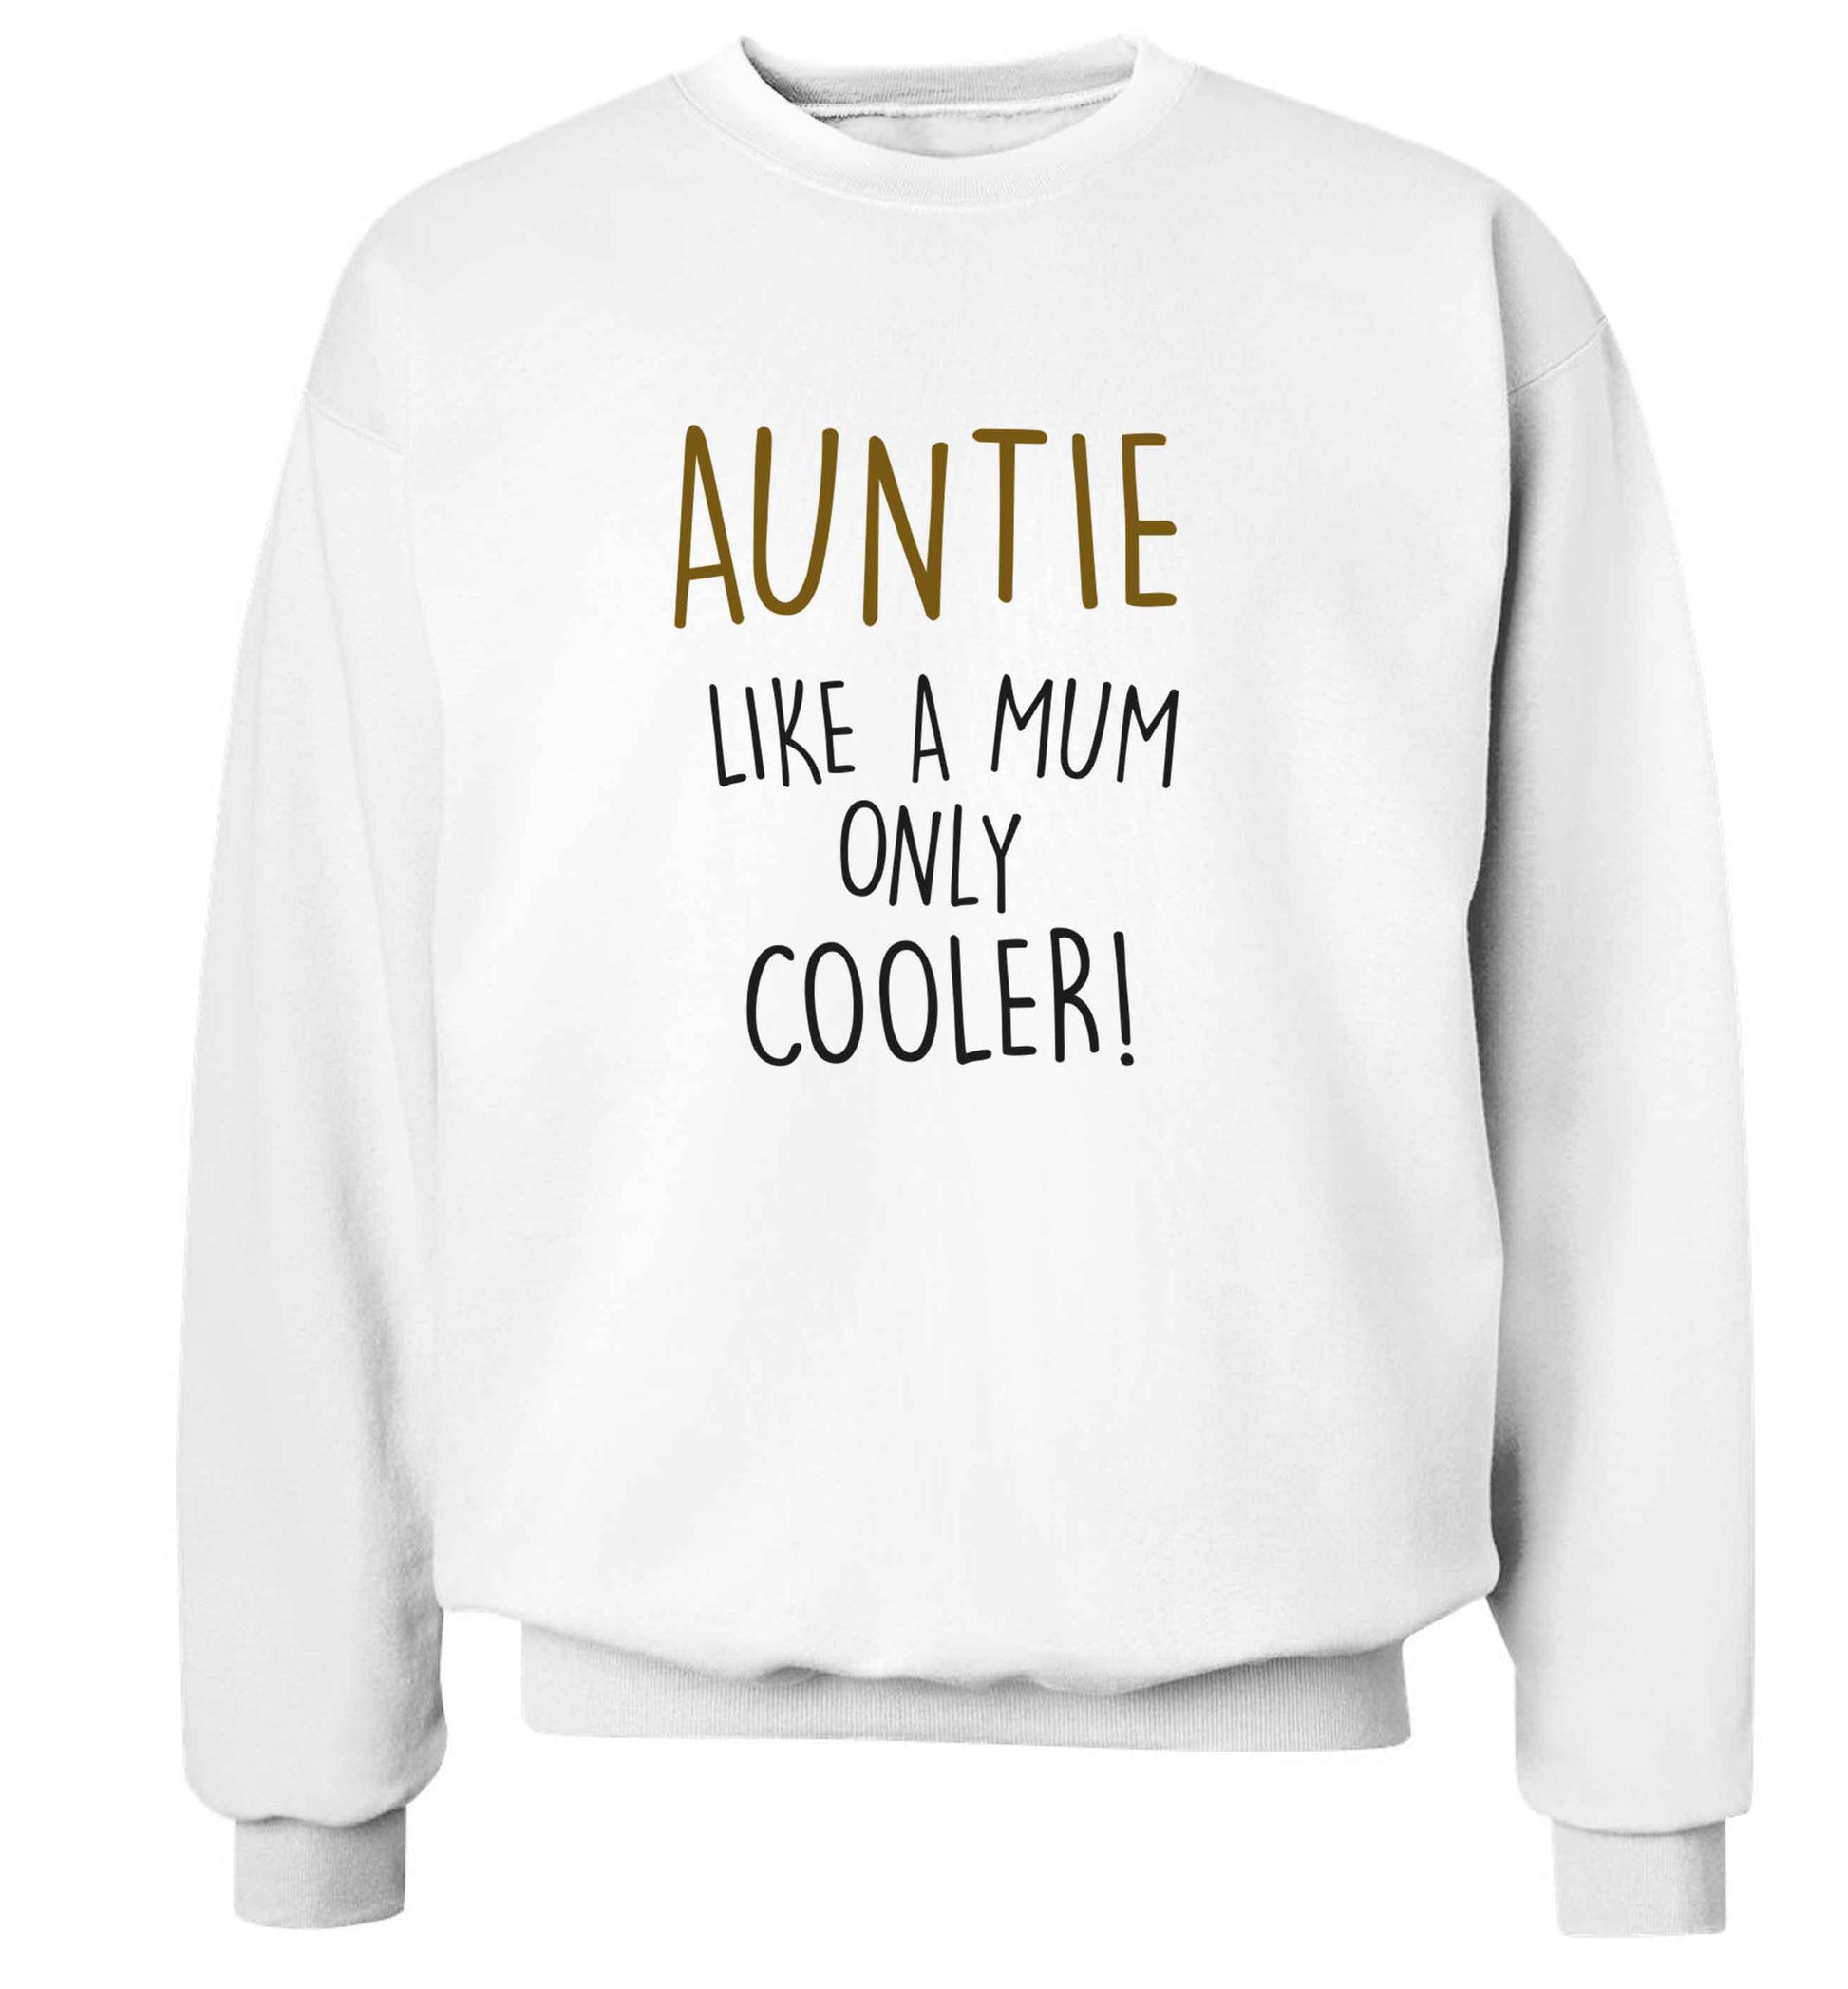 Auntie like a mum only cooler adult's unisex white sweater 2XL